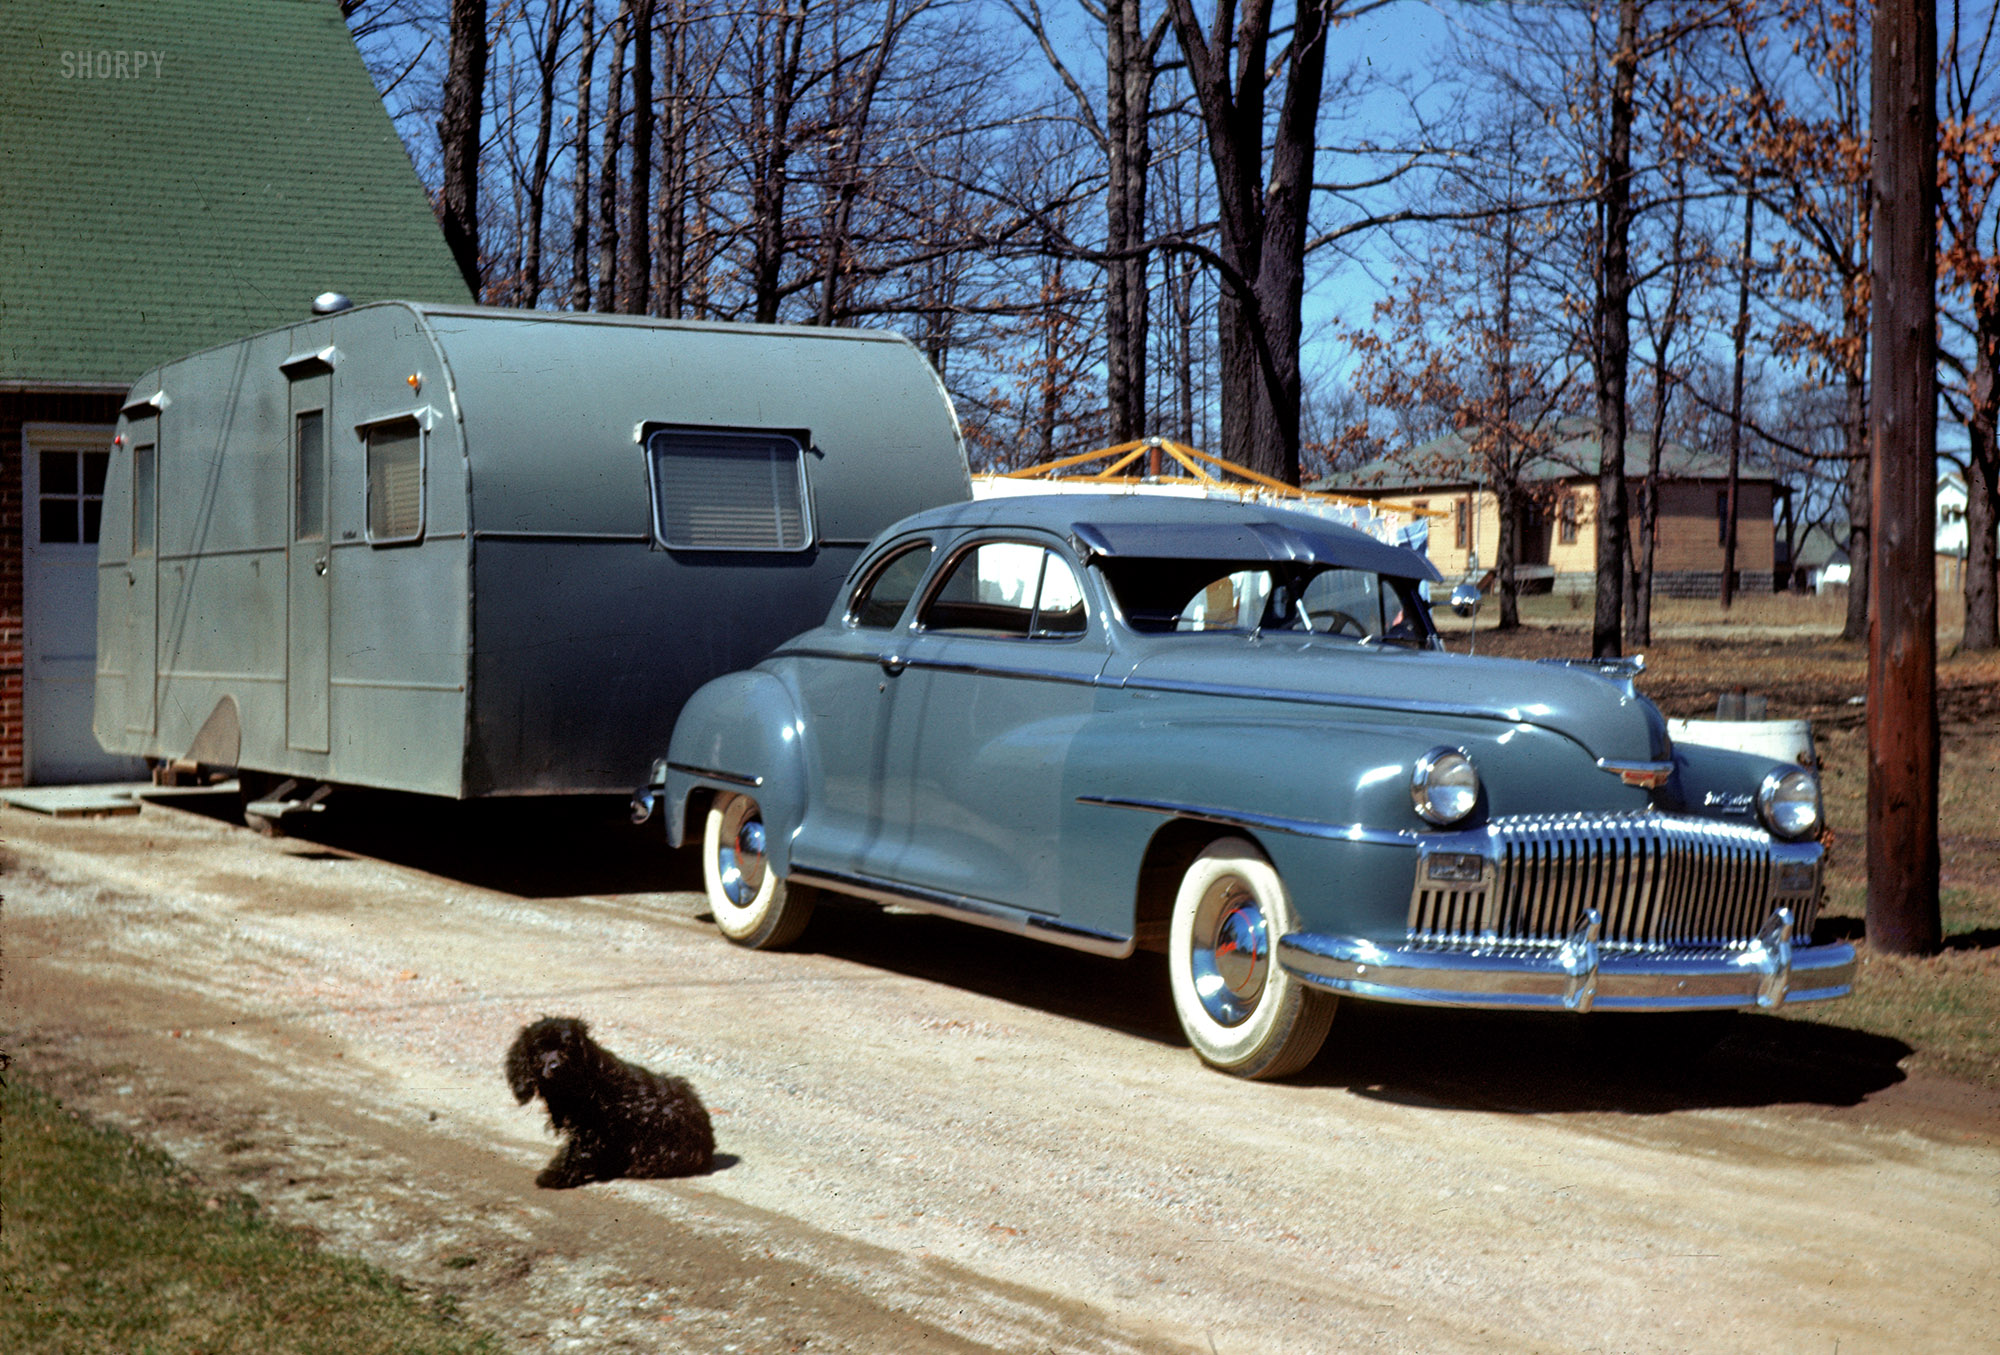 "1949." From the same batch of slides as 1951's Family Vacation comes this Kodachrome of a similar trailer. Click here for a side view. View full size.